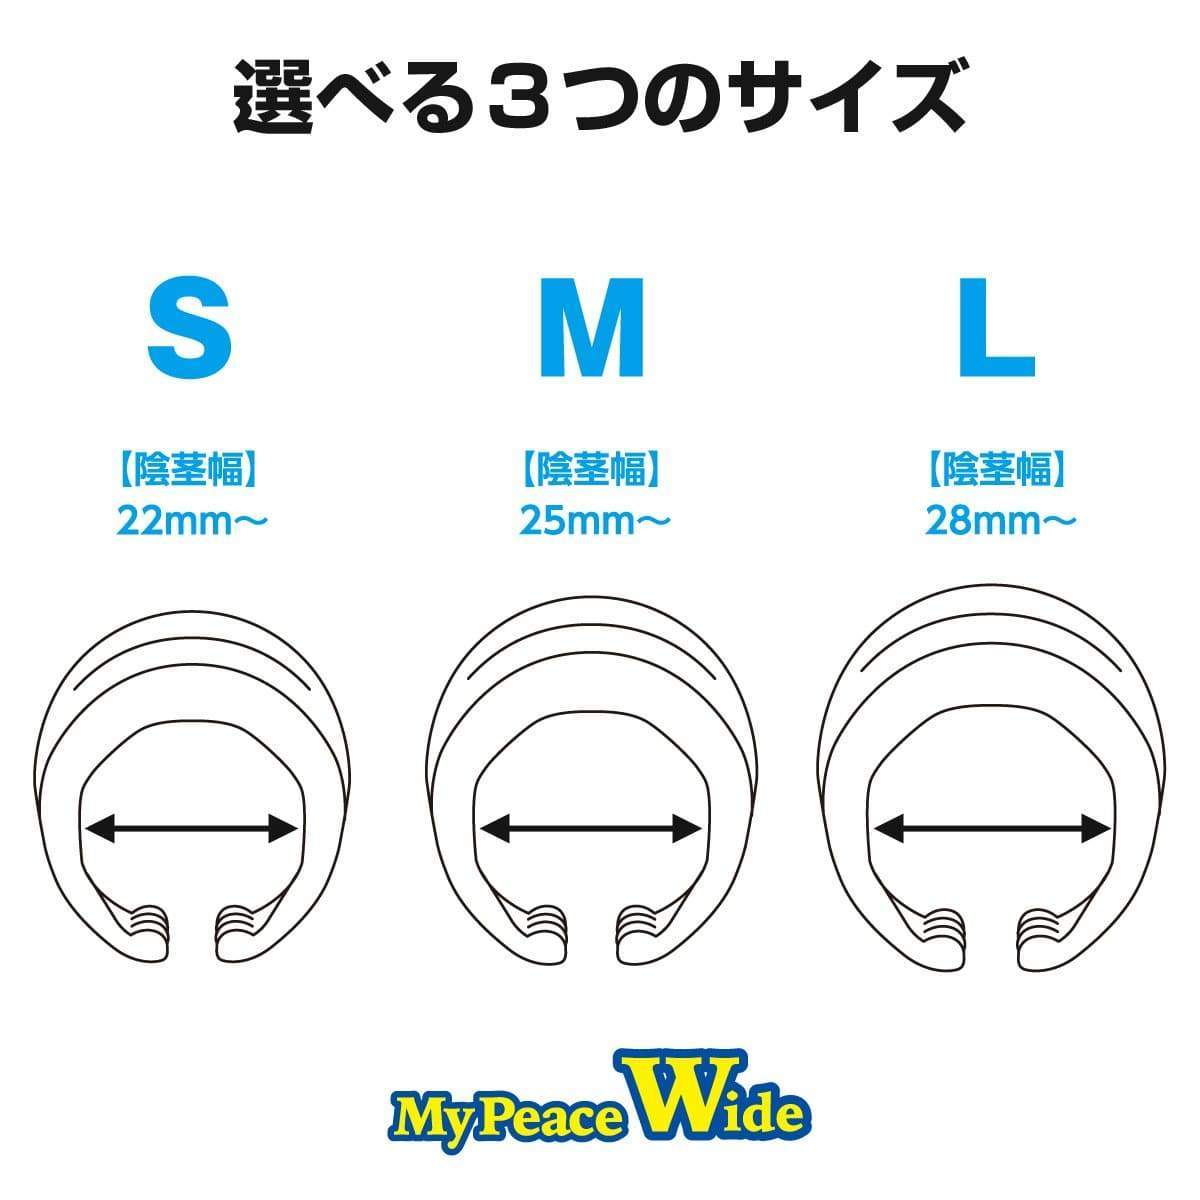 SSI Japan - My Peace Wide Standard Day Size L Correction Cock Ring (Clear) -  Cock Ring (Non Vibration)  Durio.sg